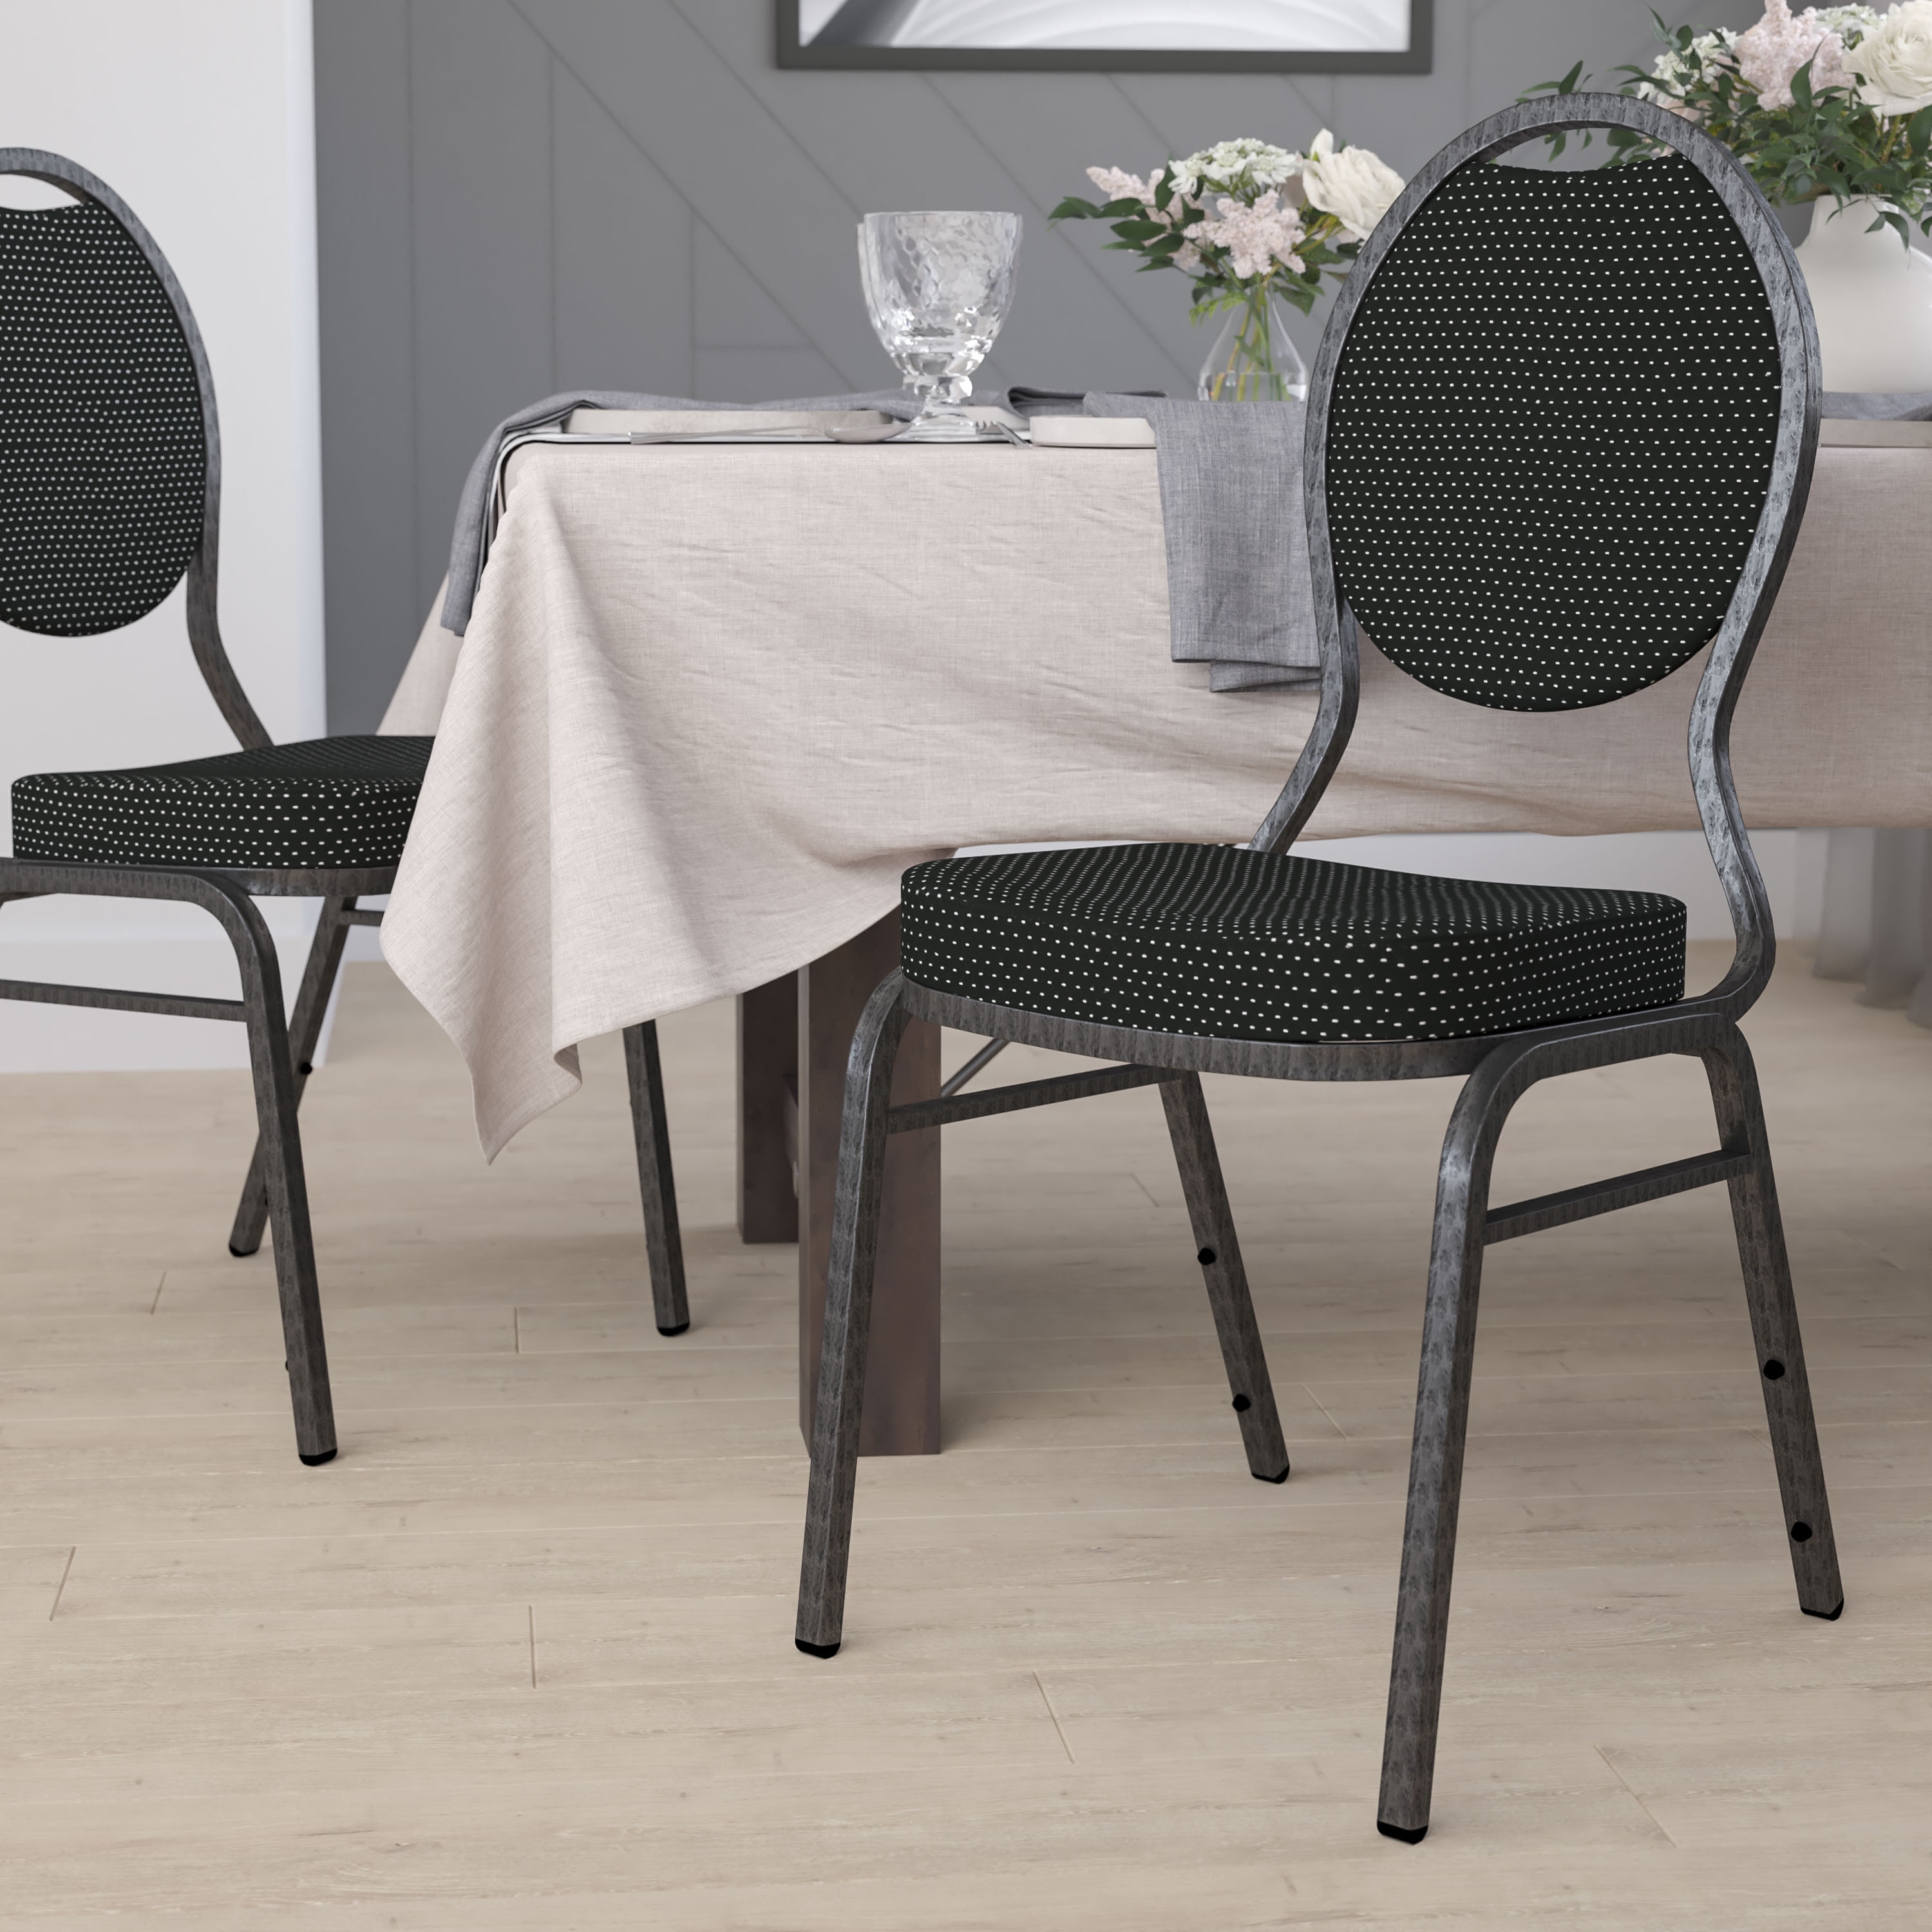 Hercules Series Teardrop Back Stacking Banquet Chair with 2.5-inch thick Seat 